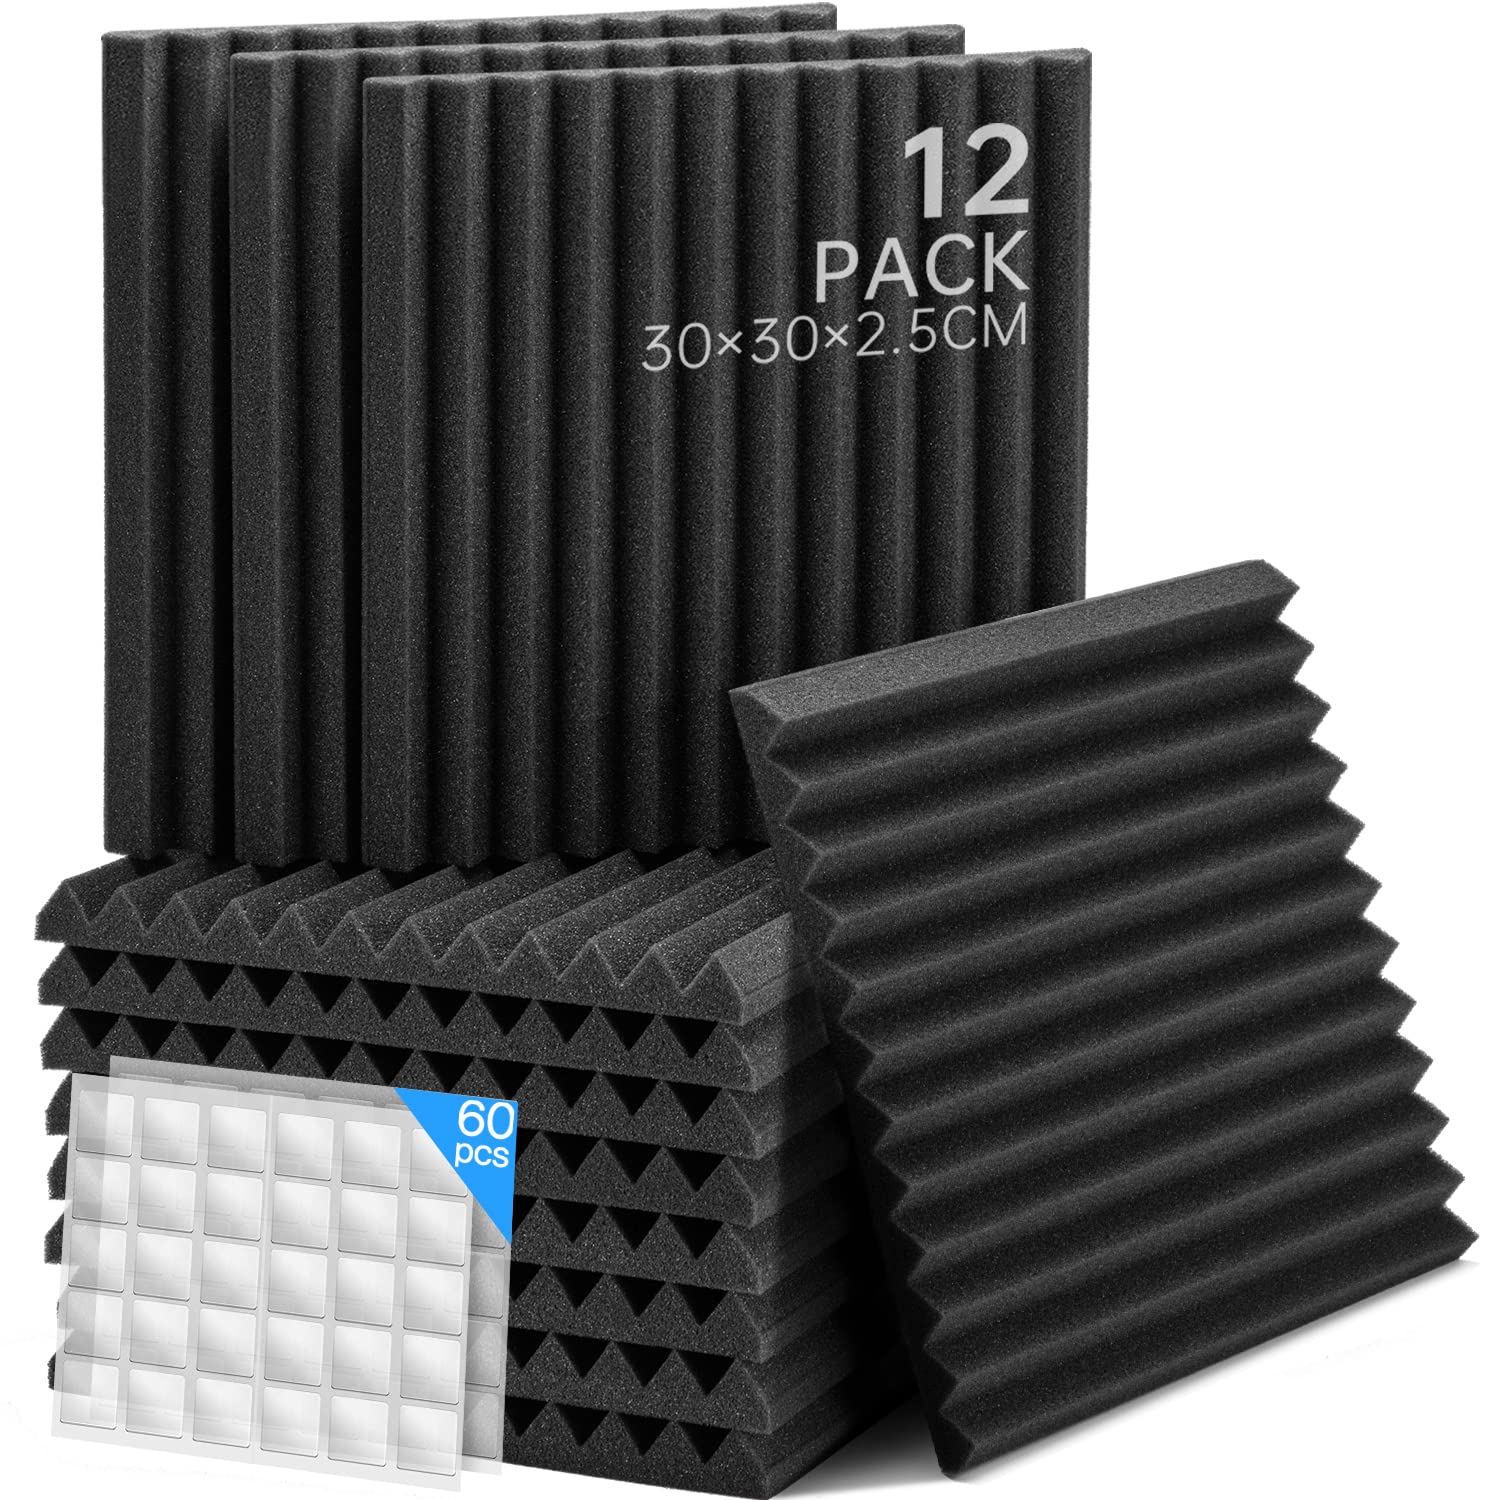 Soundproofing materials